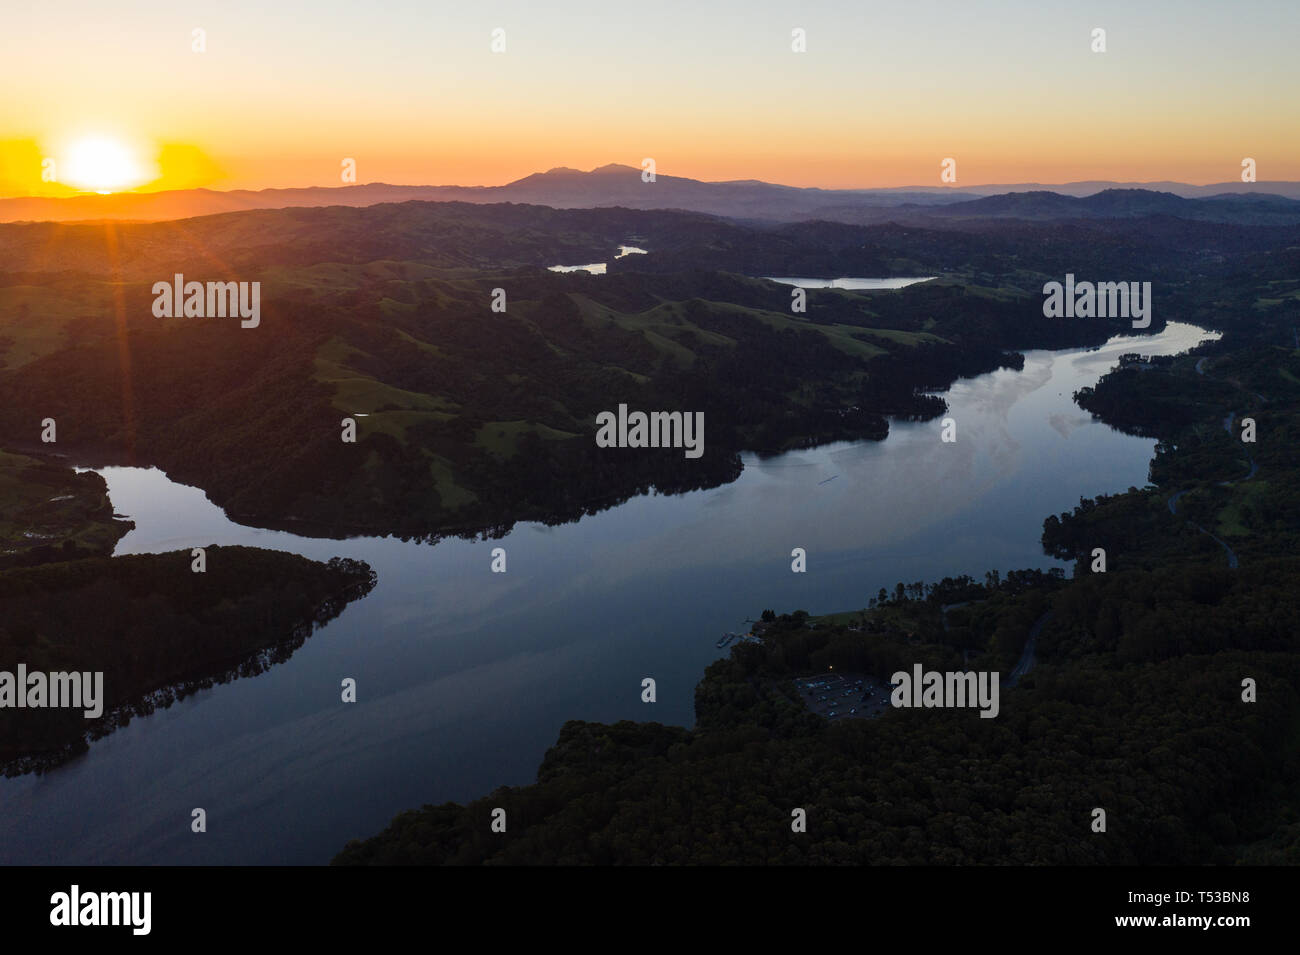 A beautiful dawn breaks over the green hills around the San Pablo Reservoir in Northern California. A wet winter has caused lush vegetation growth. Stock Photo